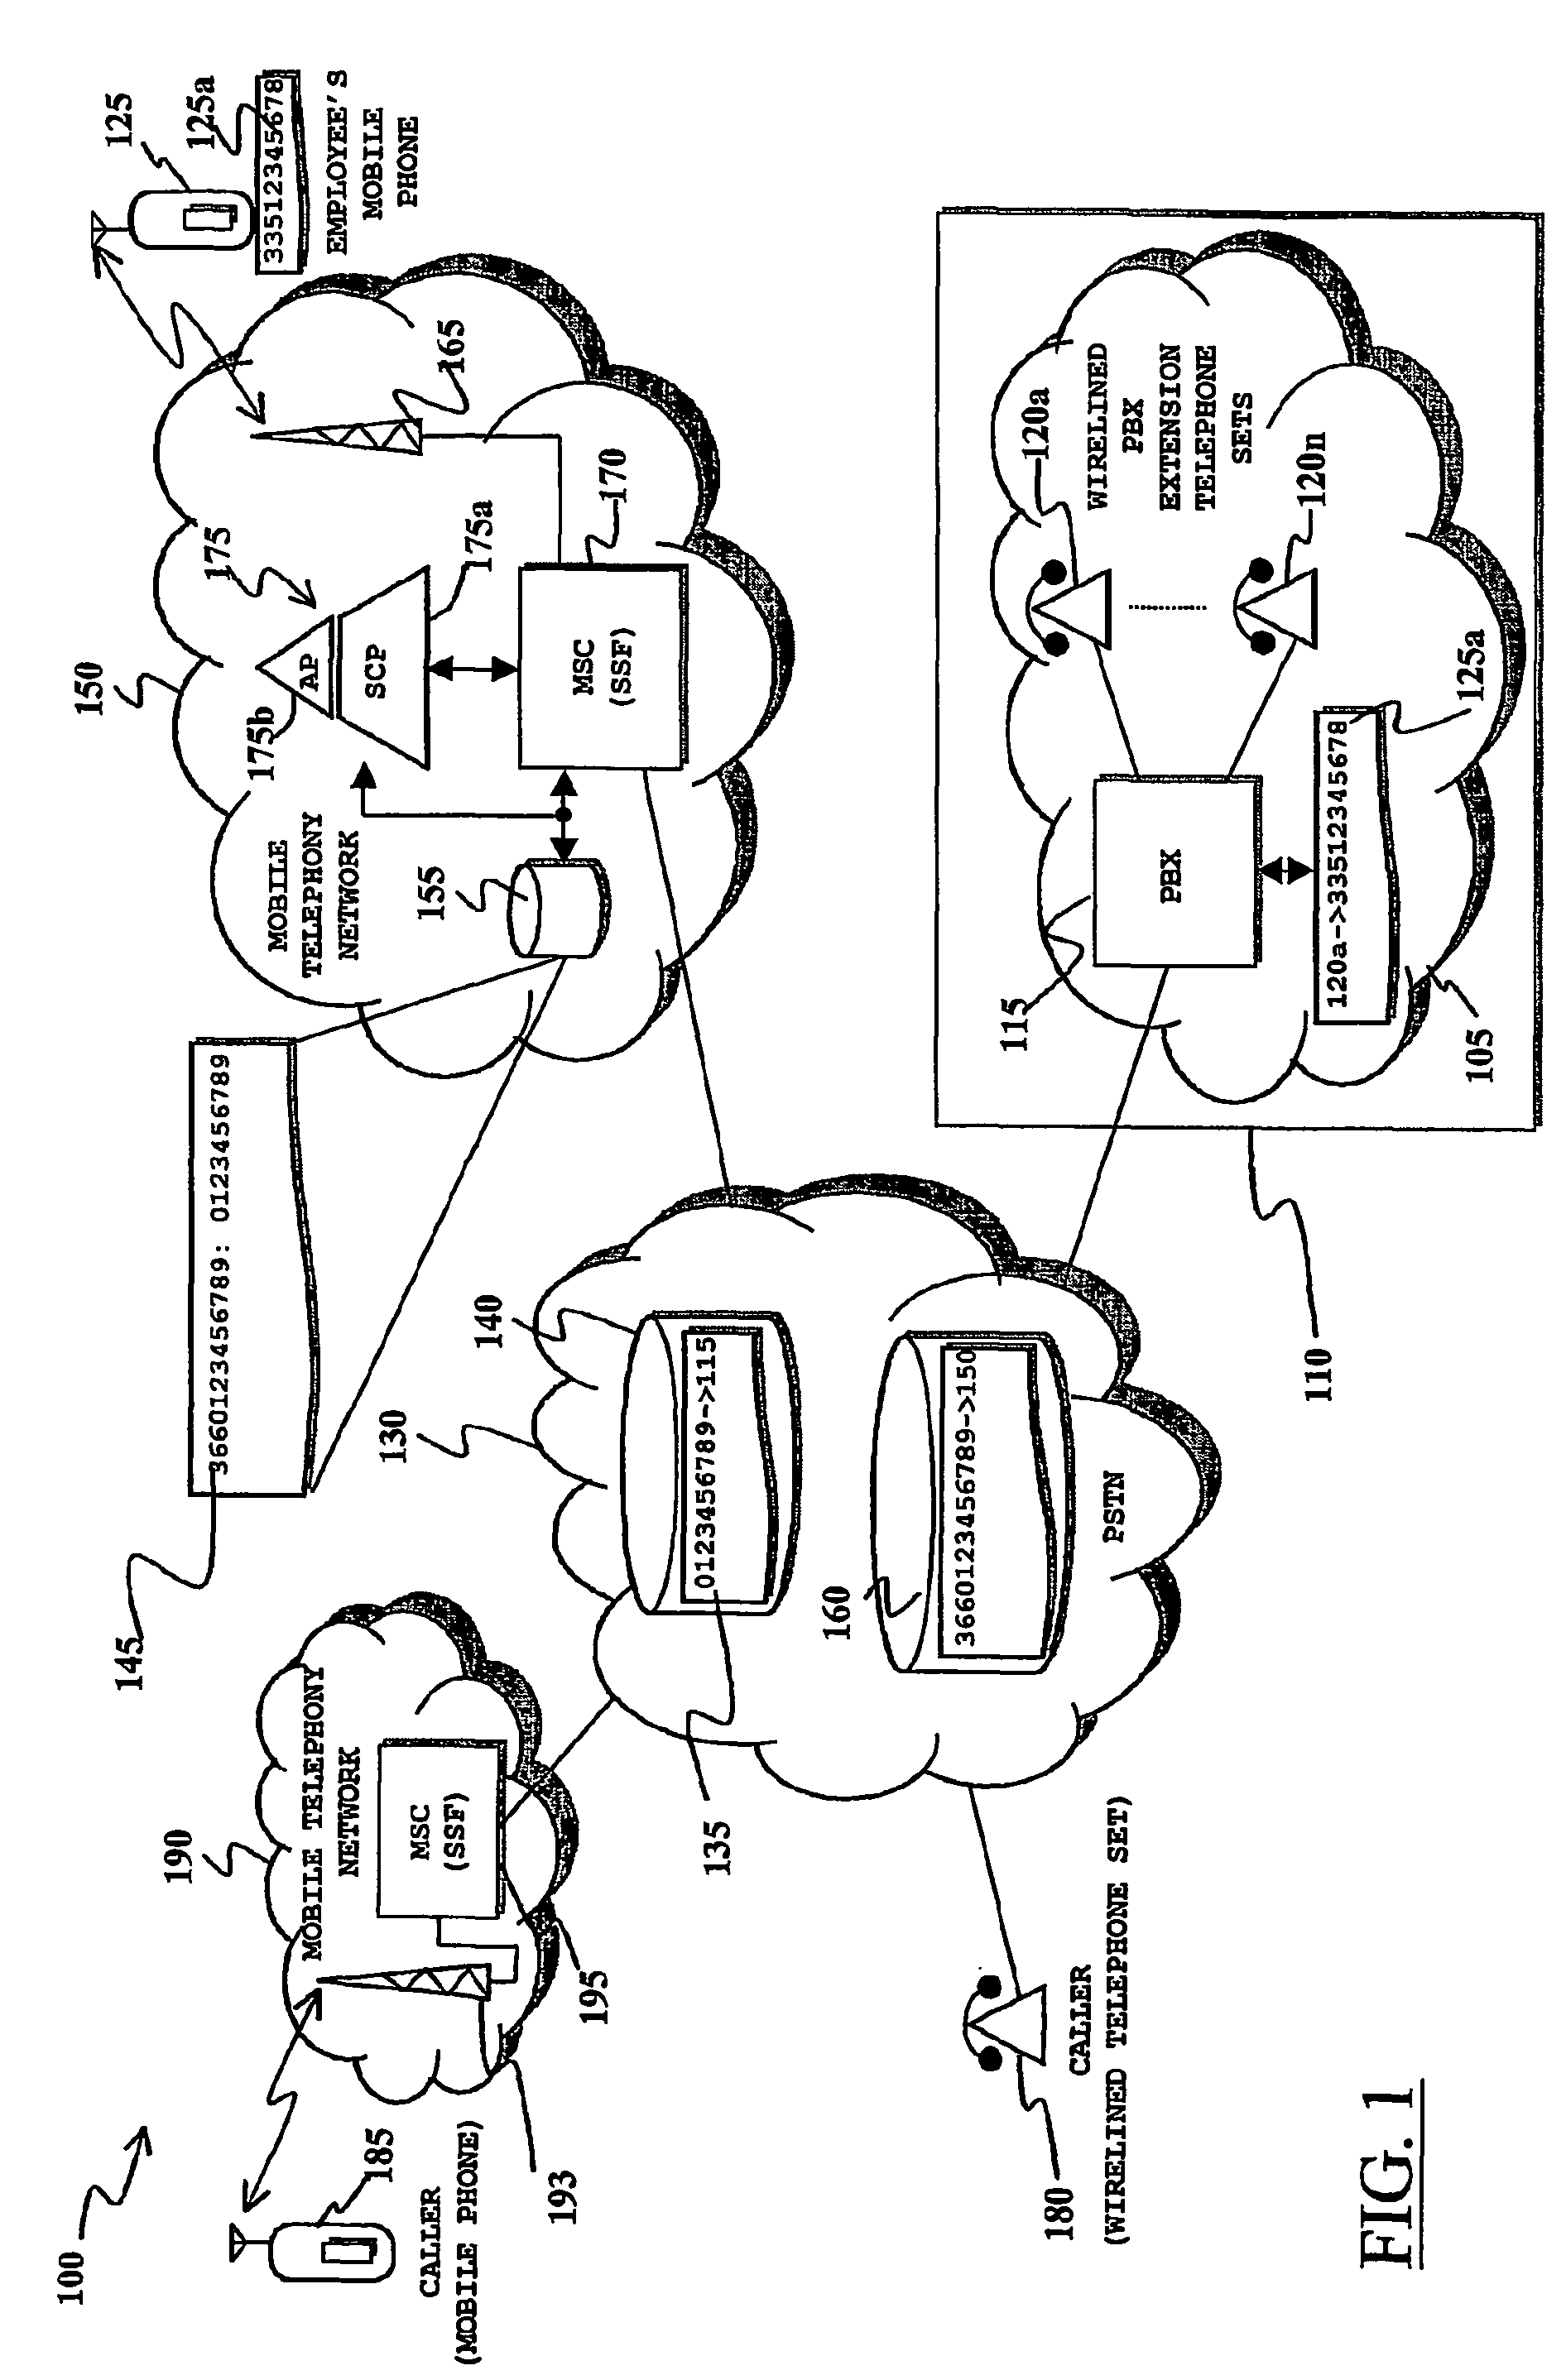 Method and system for call forwarding between a wireless switching apparatus and a fixed telephony network using a virtual number